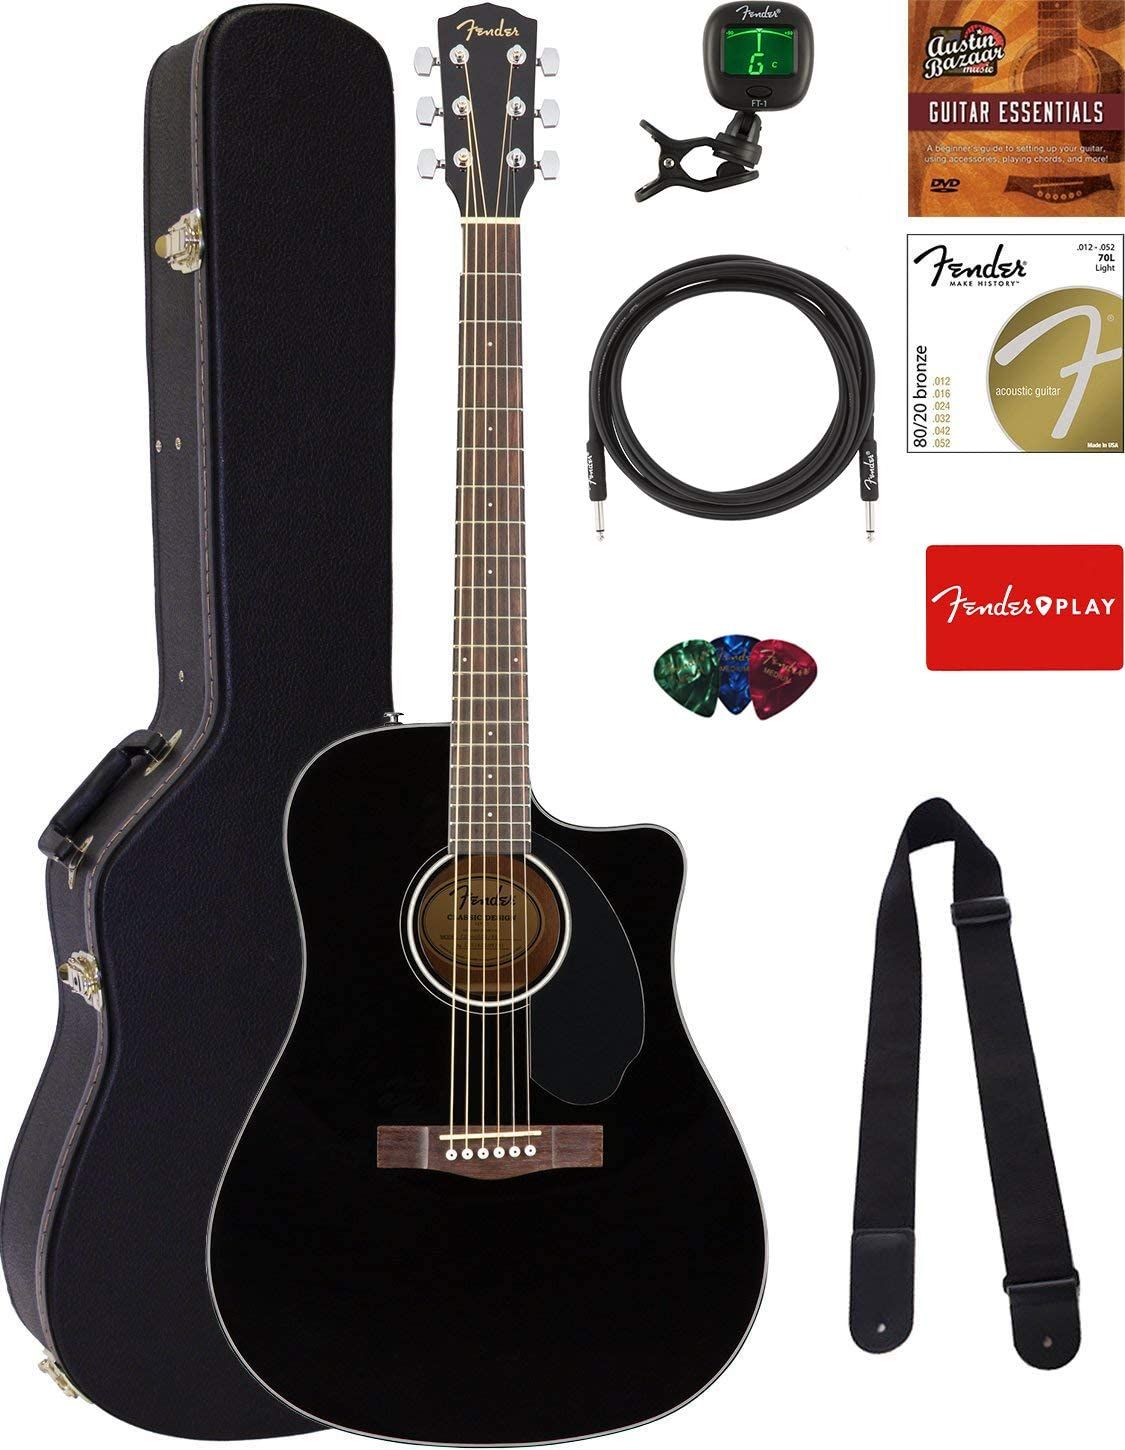 Solid Top Dreadnought Acoustic-Electric Guitar with straps and bag